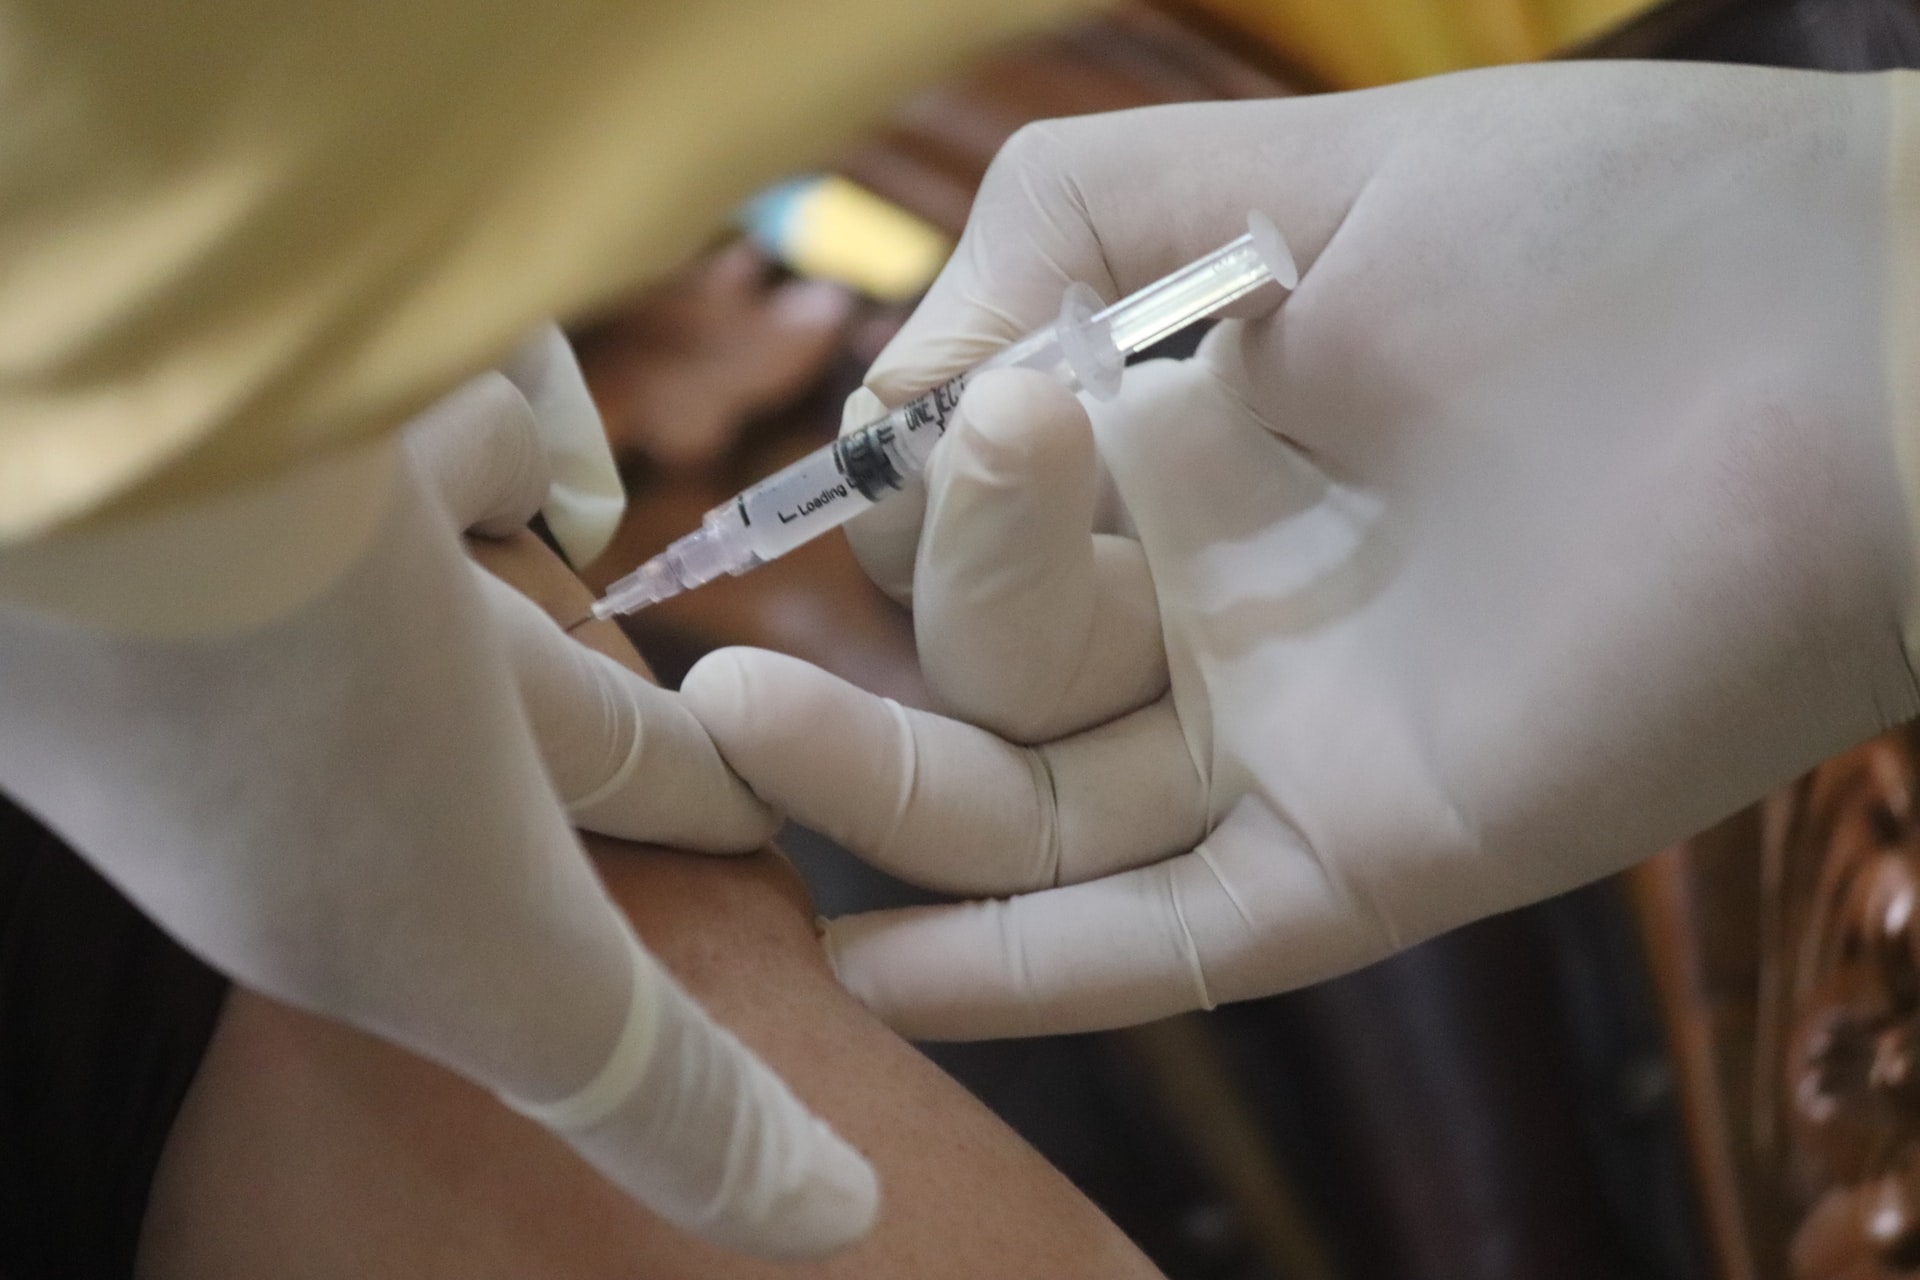 The hands of a medical professional giving someone a vaccine shot